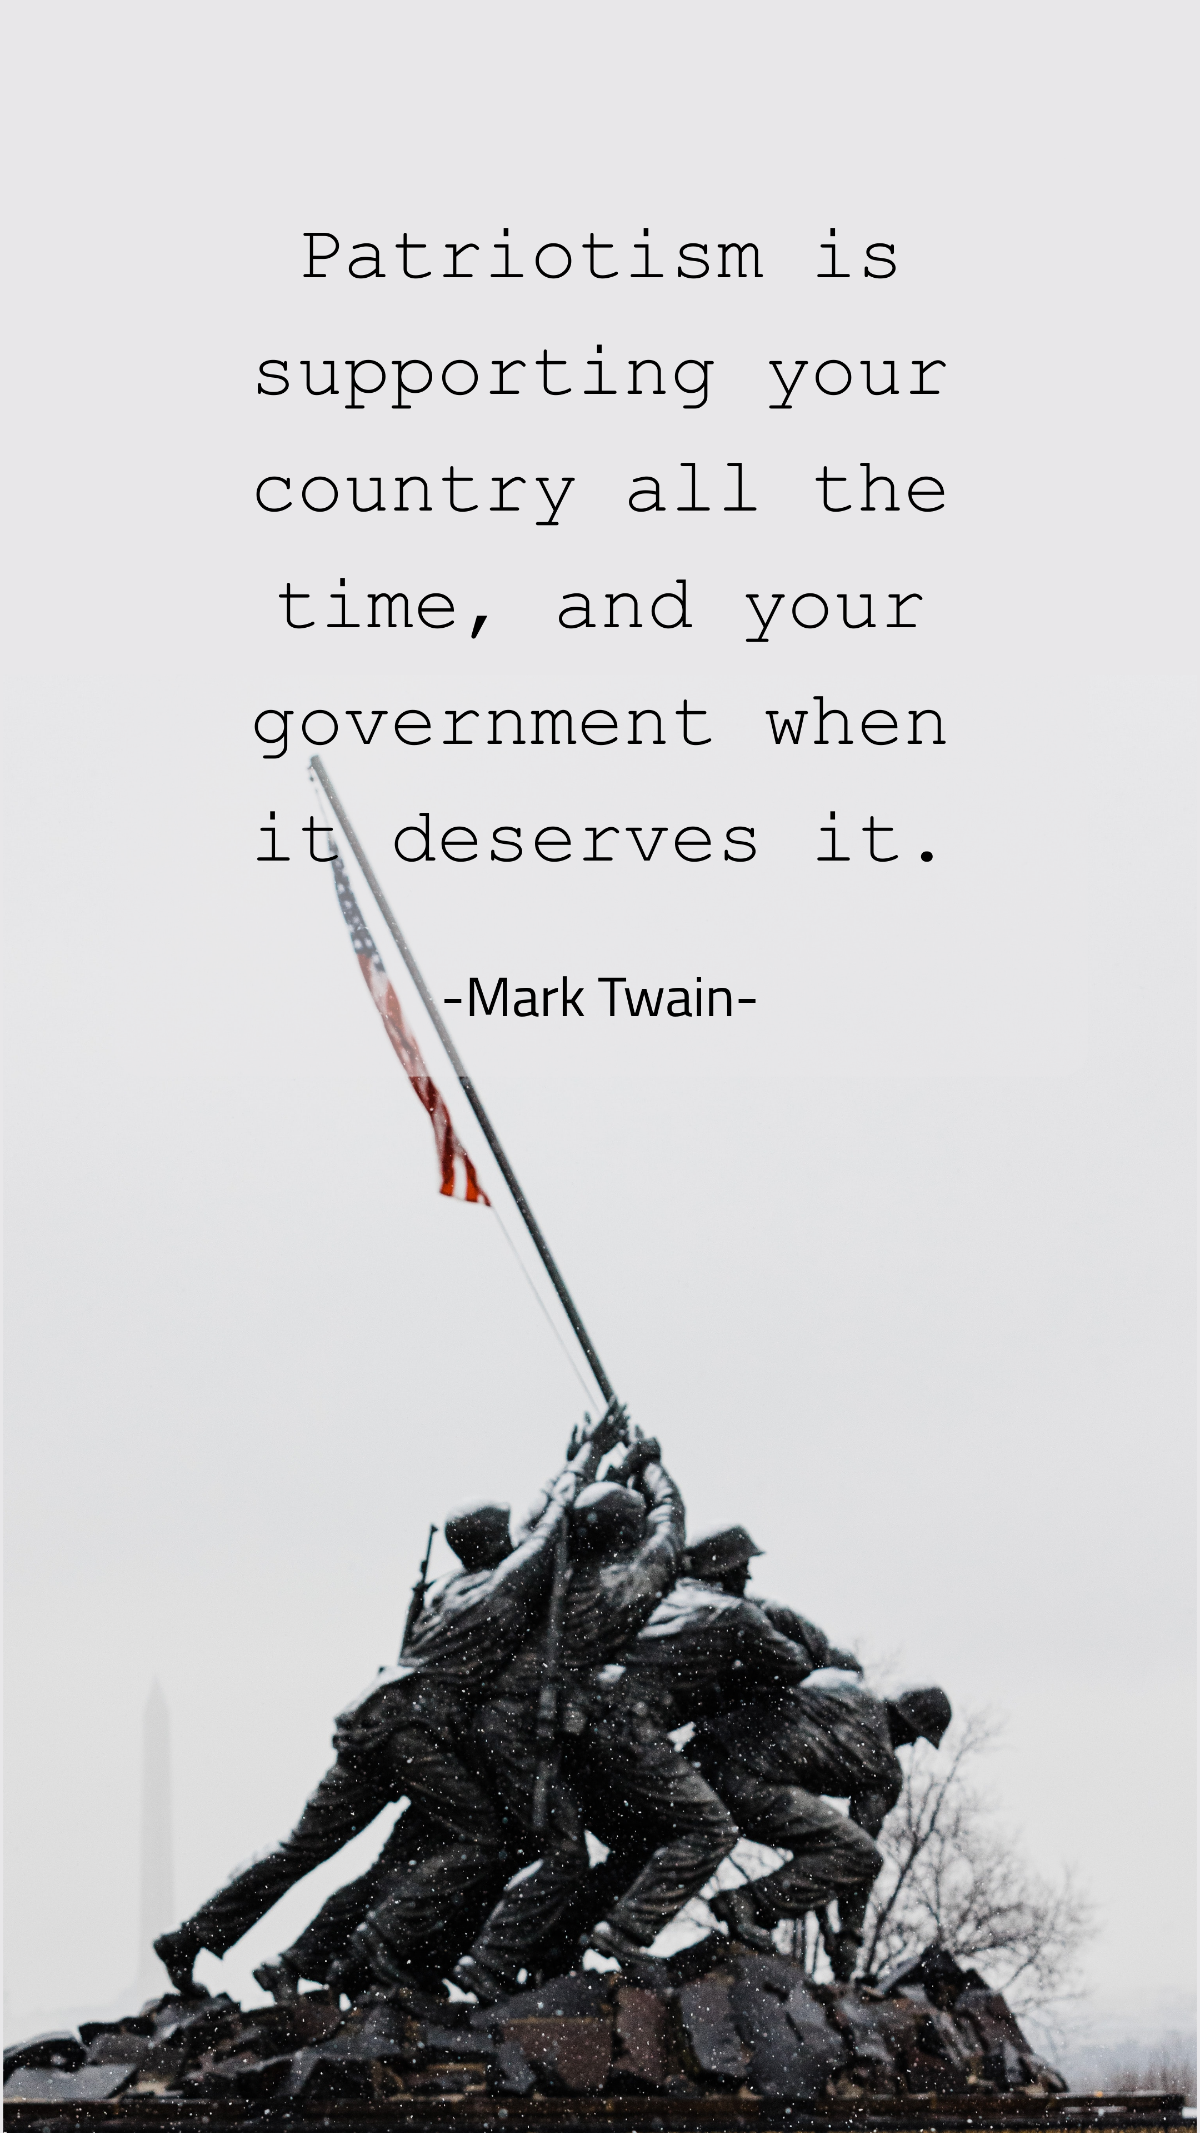 Mark Twain - Patriotism is supporting your country all the time, and your government when it deserves it. Template